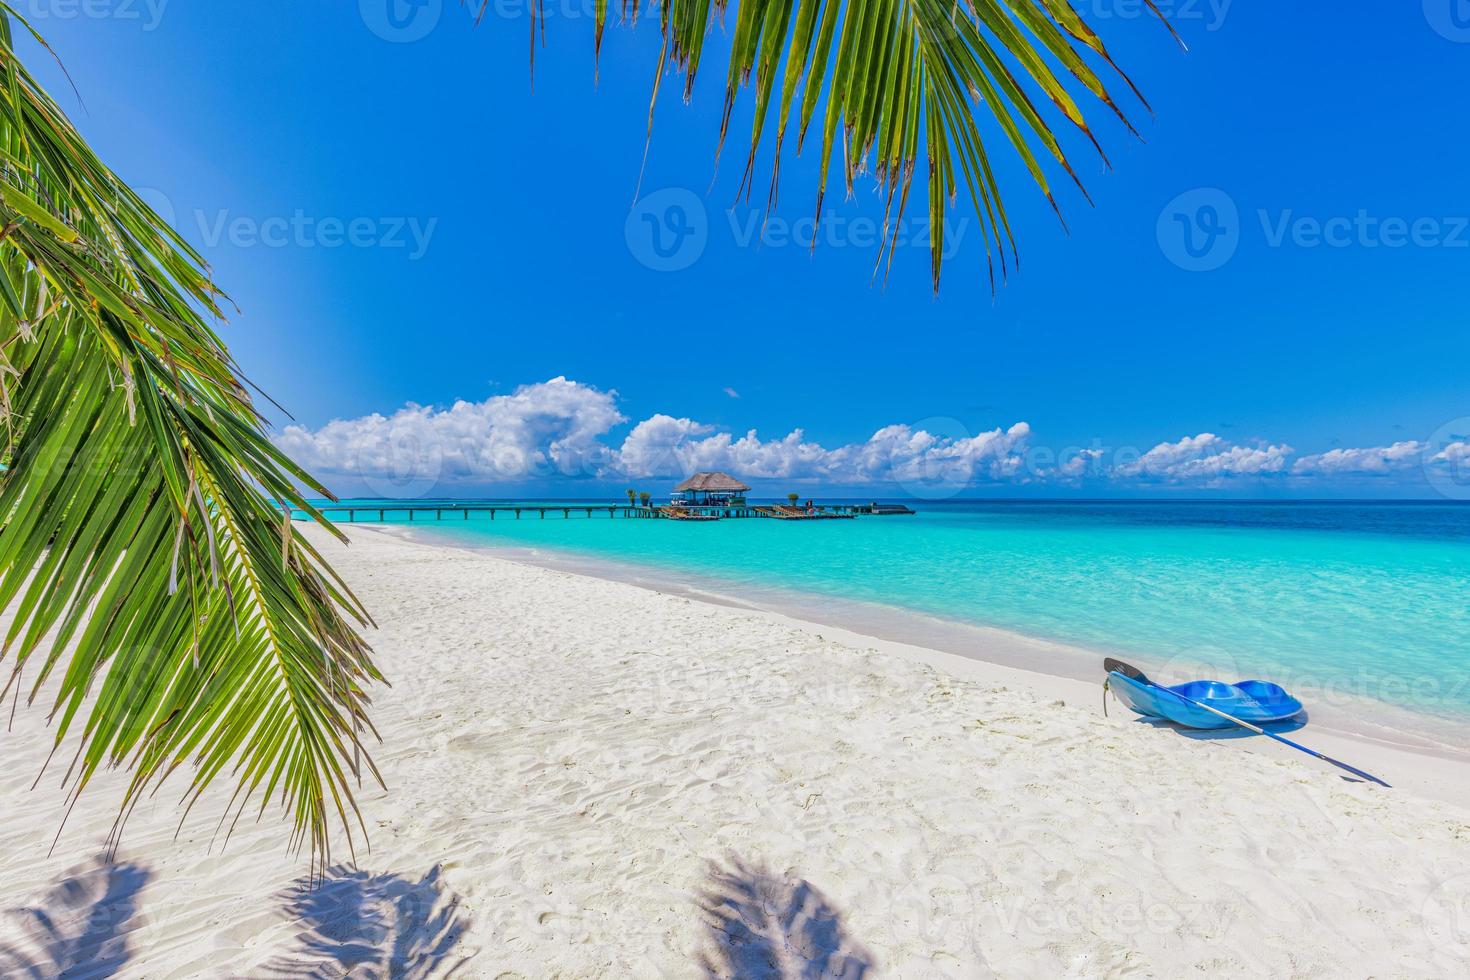 Maldives island beach with blue kayak on shore. Tropical landscape of summer, white sand with palm trees. Luxury travel vacation destination. Exotic beach landscape. Amazing nature, relax, freedom photo